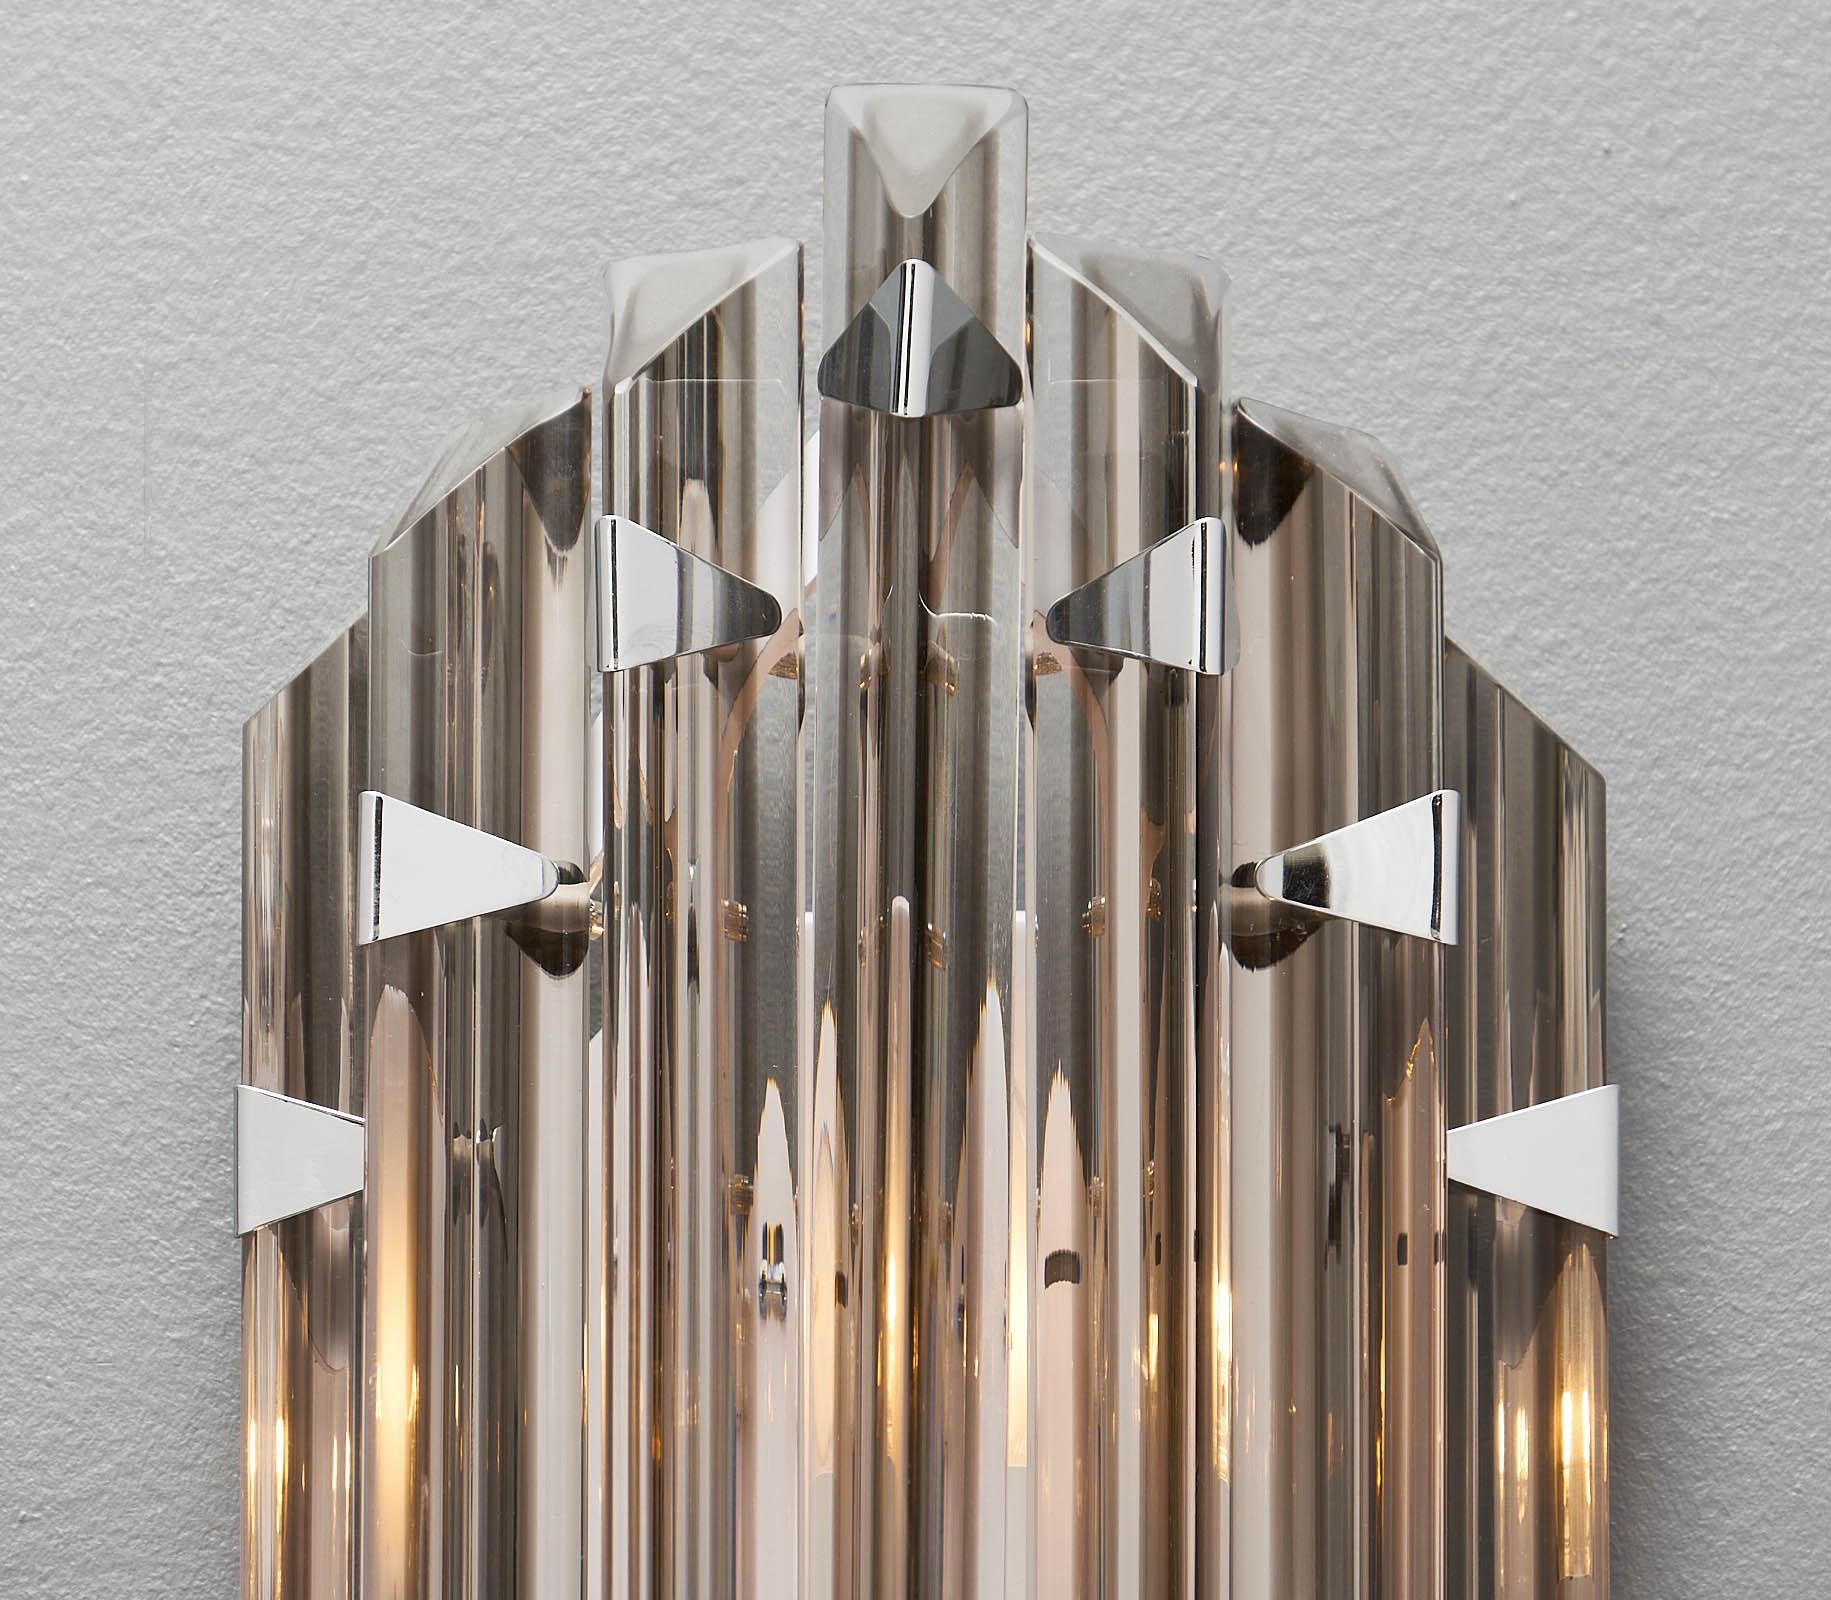 Italian Murano glass smoked Venini sconces. This “triedi” style pair by Venini features chromed attachments and structure. A smoked strip of glass is fused into the clear crystal glass, providing the right hint of color. This pair has been newly